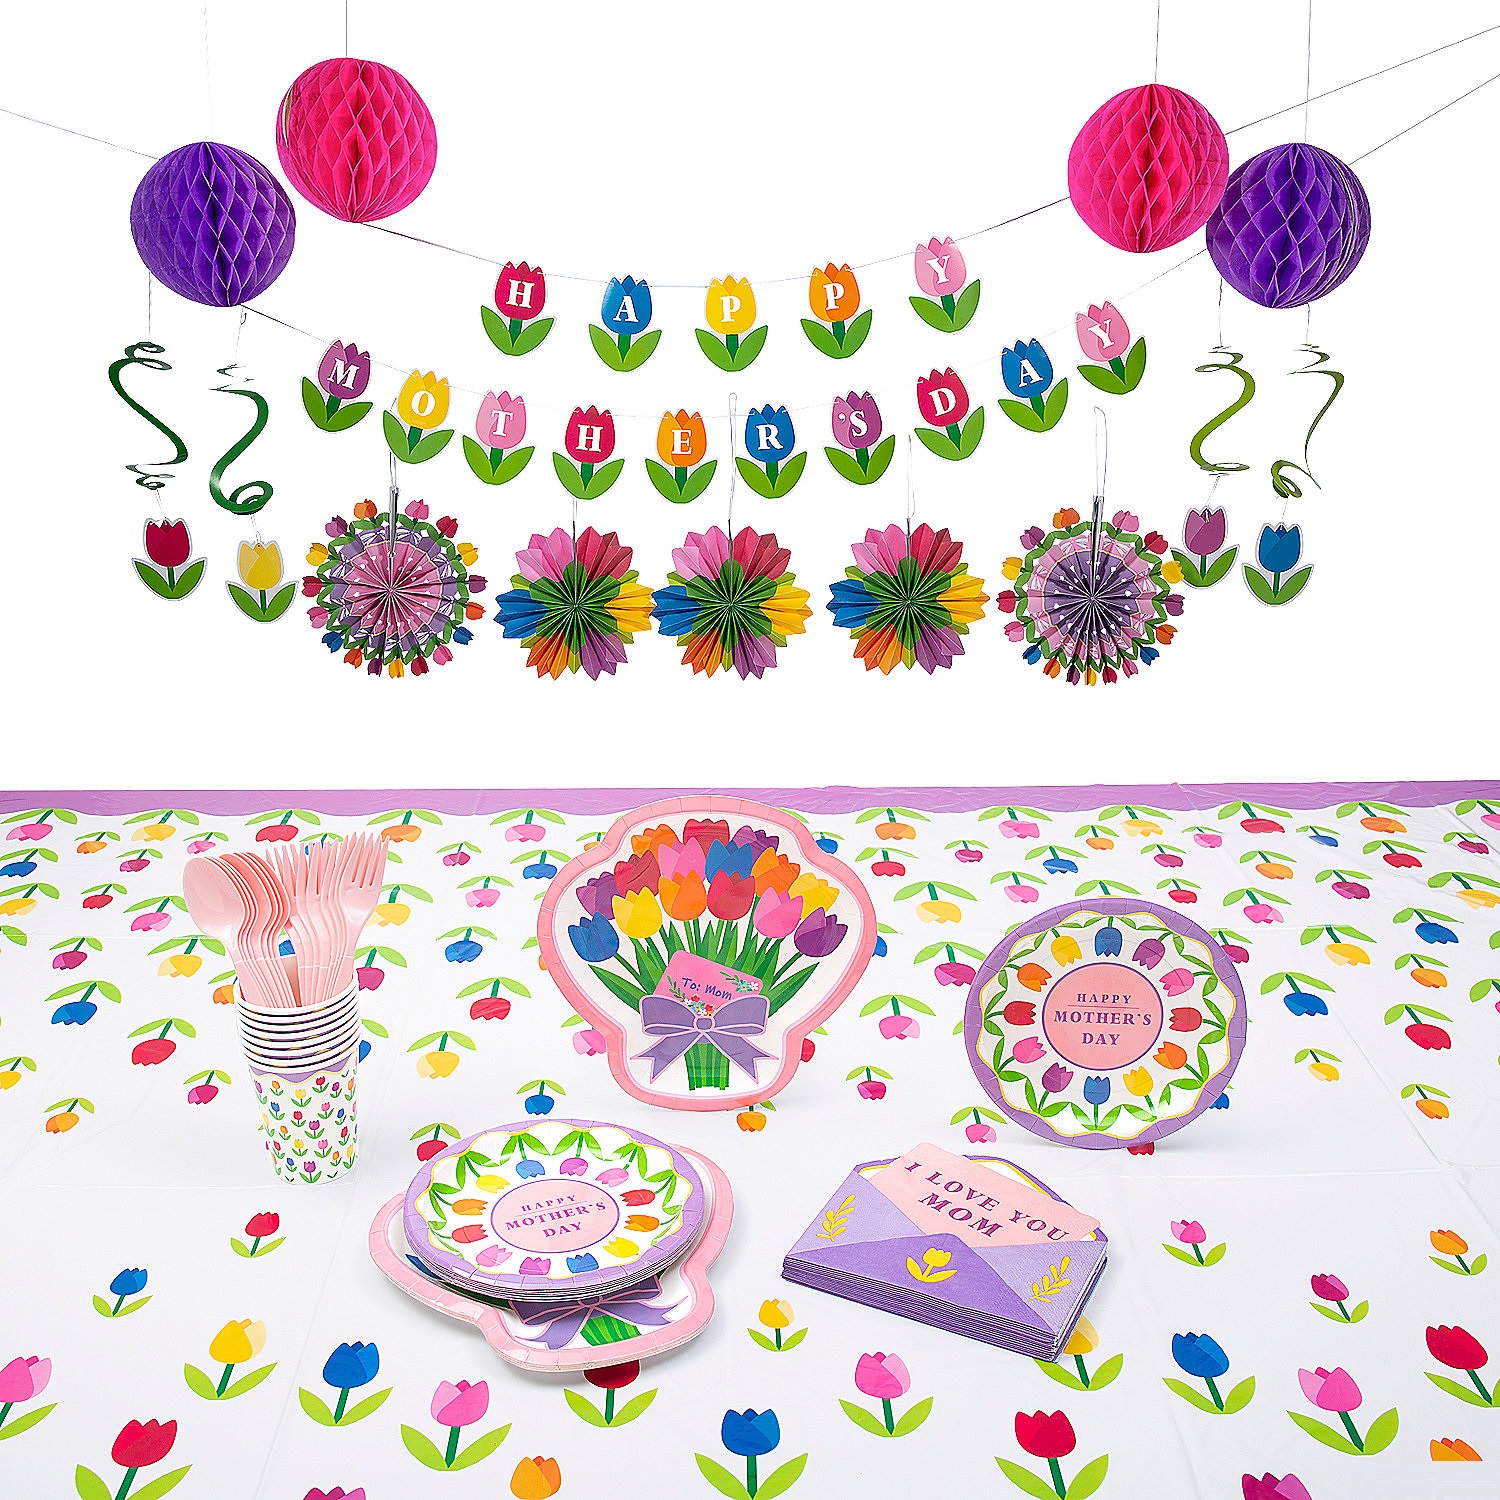 bright-mothers-day-tableware-kit-for-8-guests-72-pc-_14106096